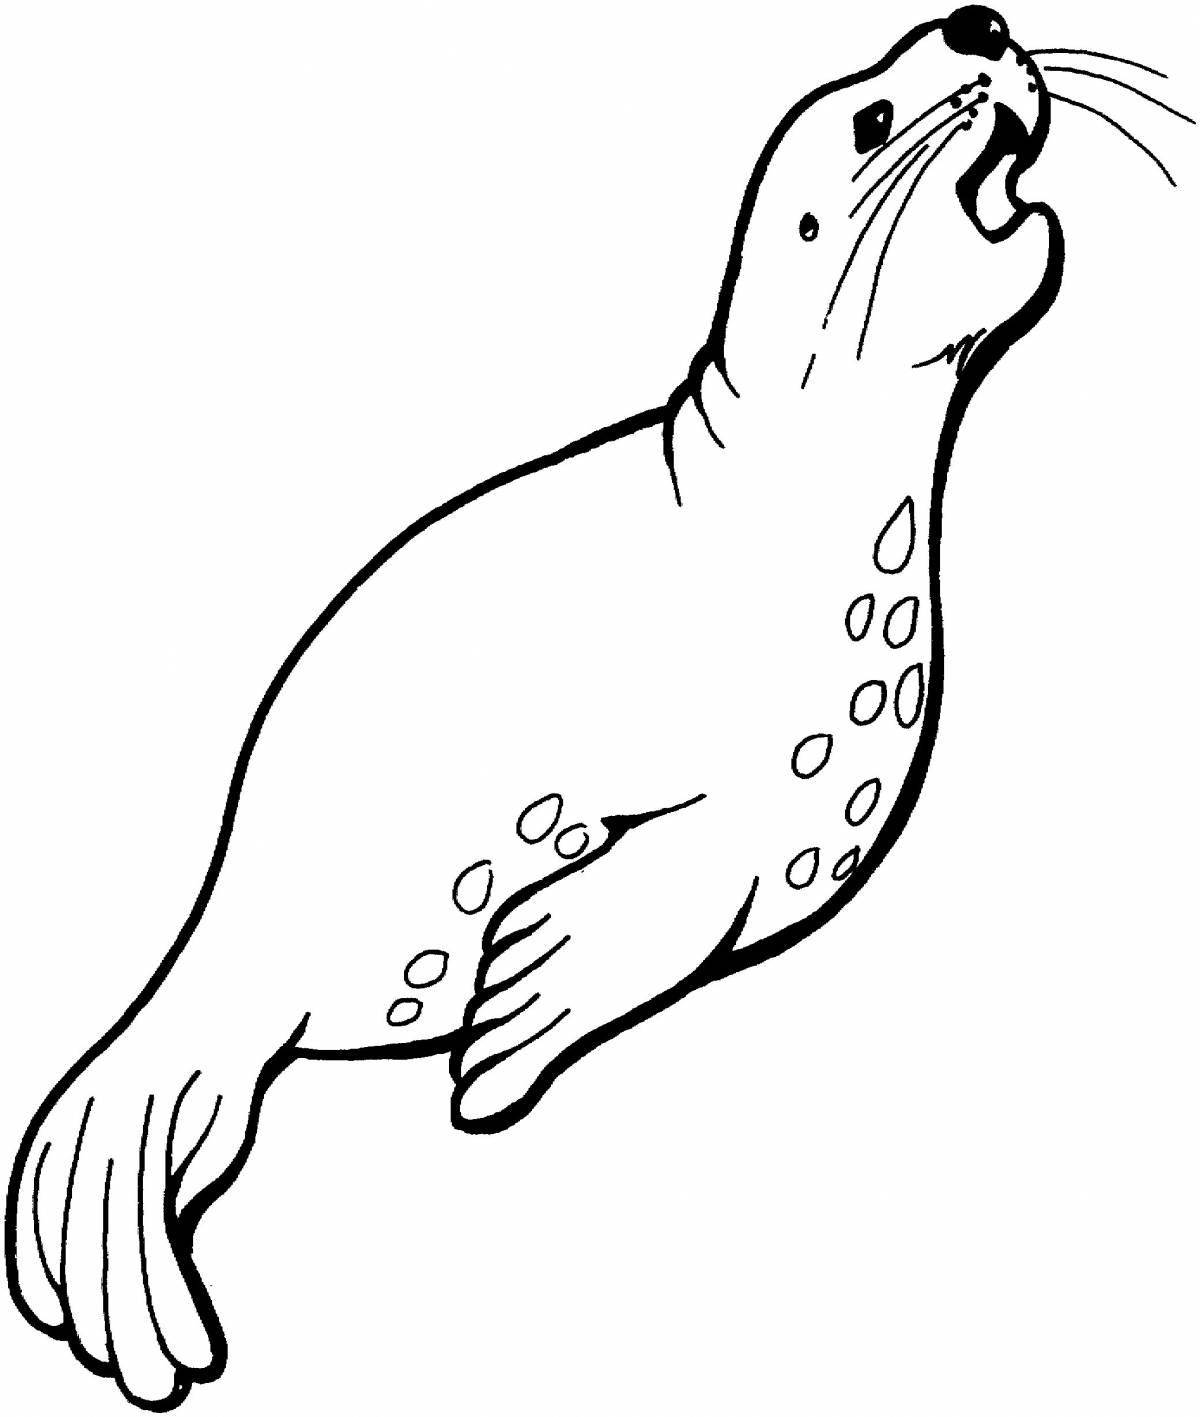 Colorful sea lion coloring page for kids